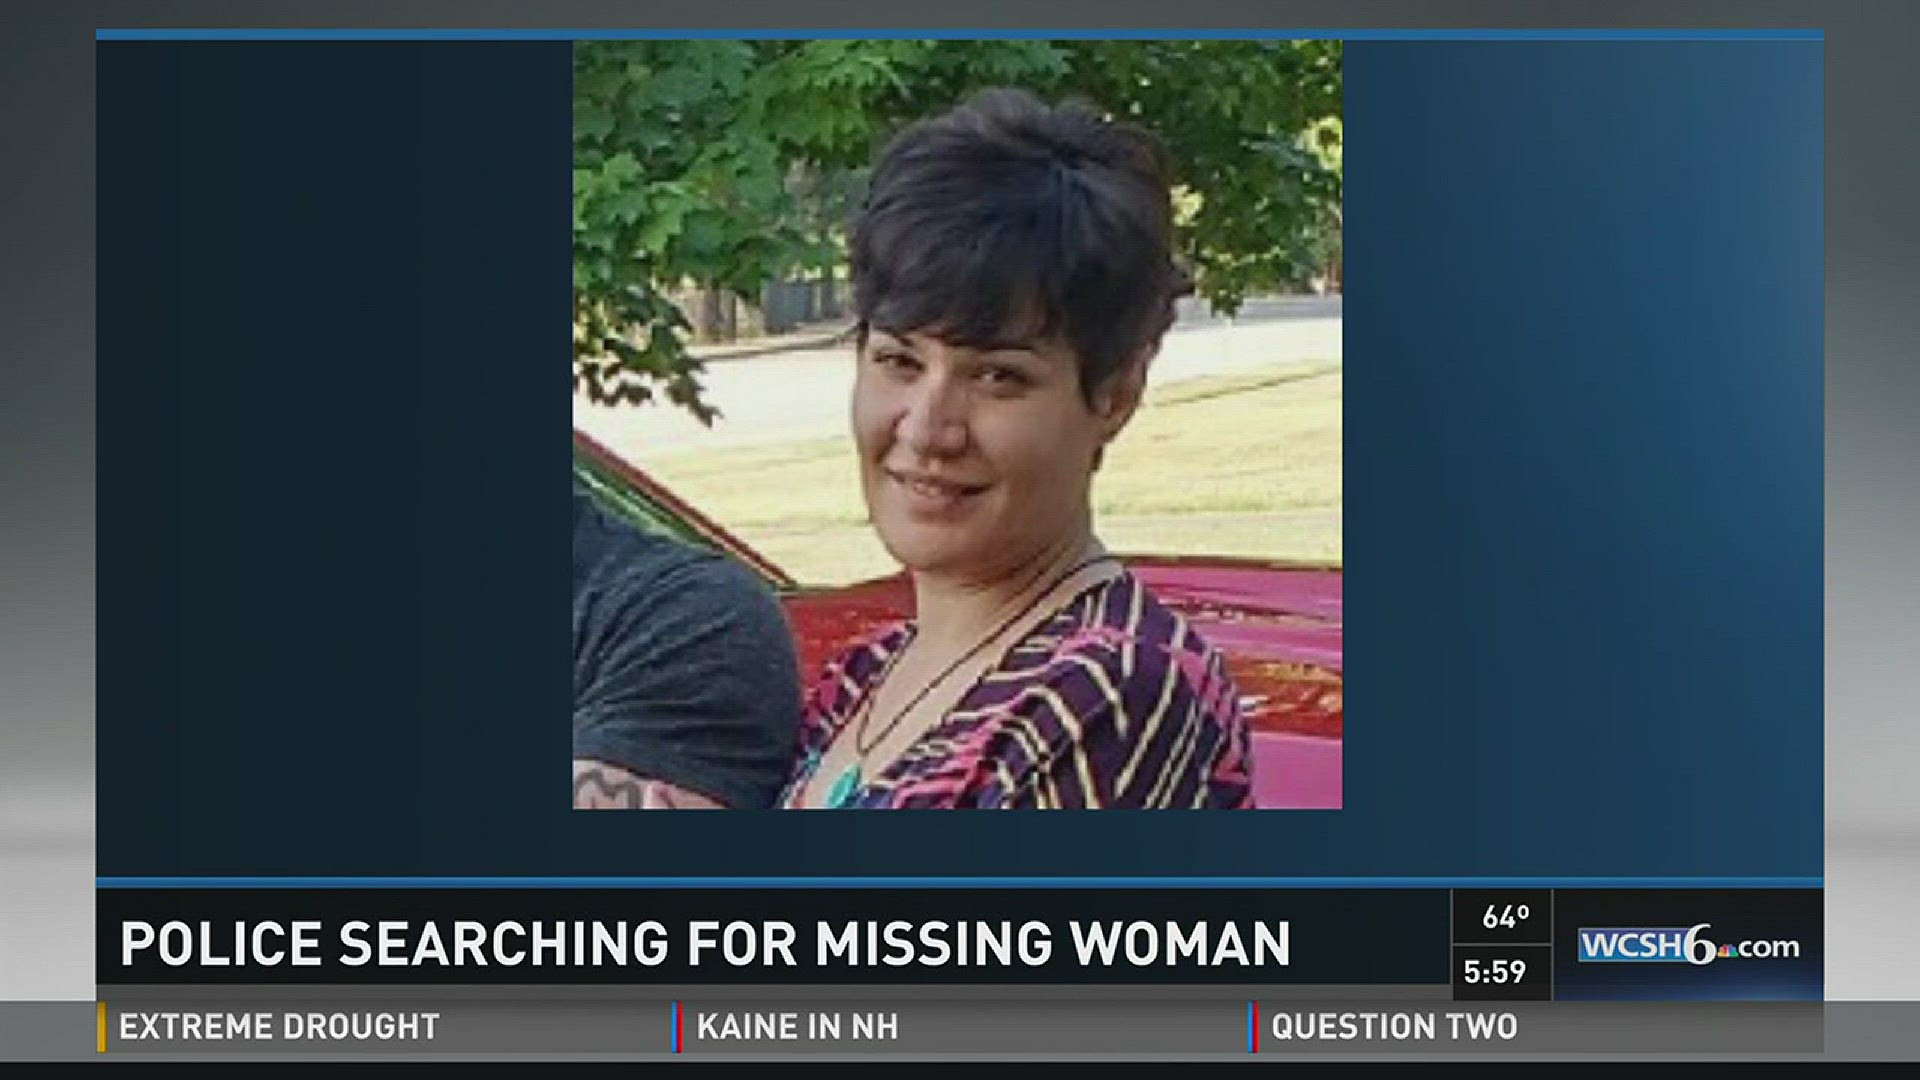 Police and community searches for Fairfield woman.